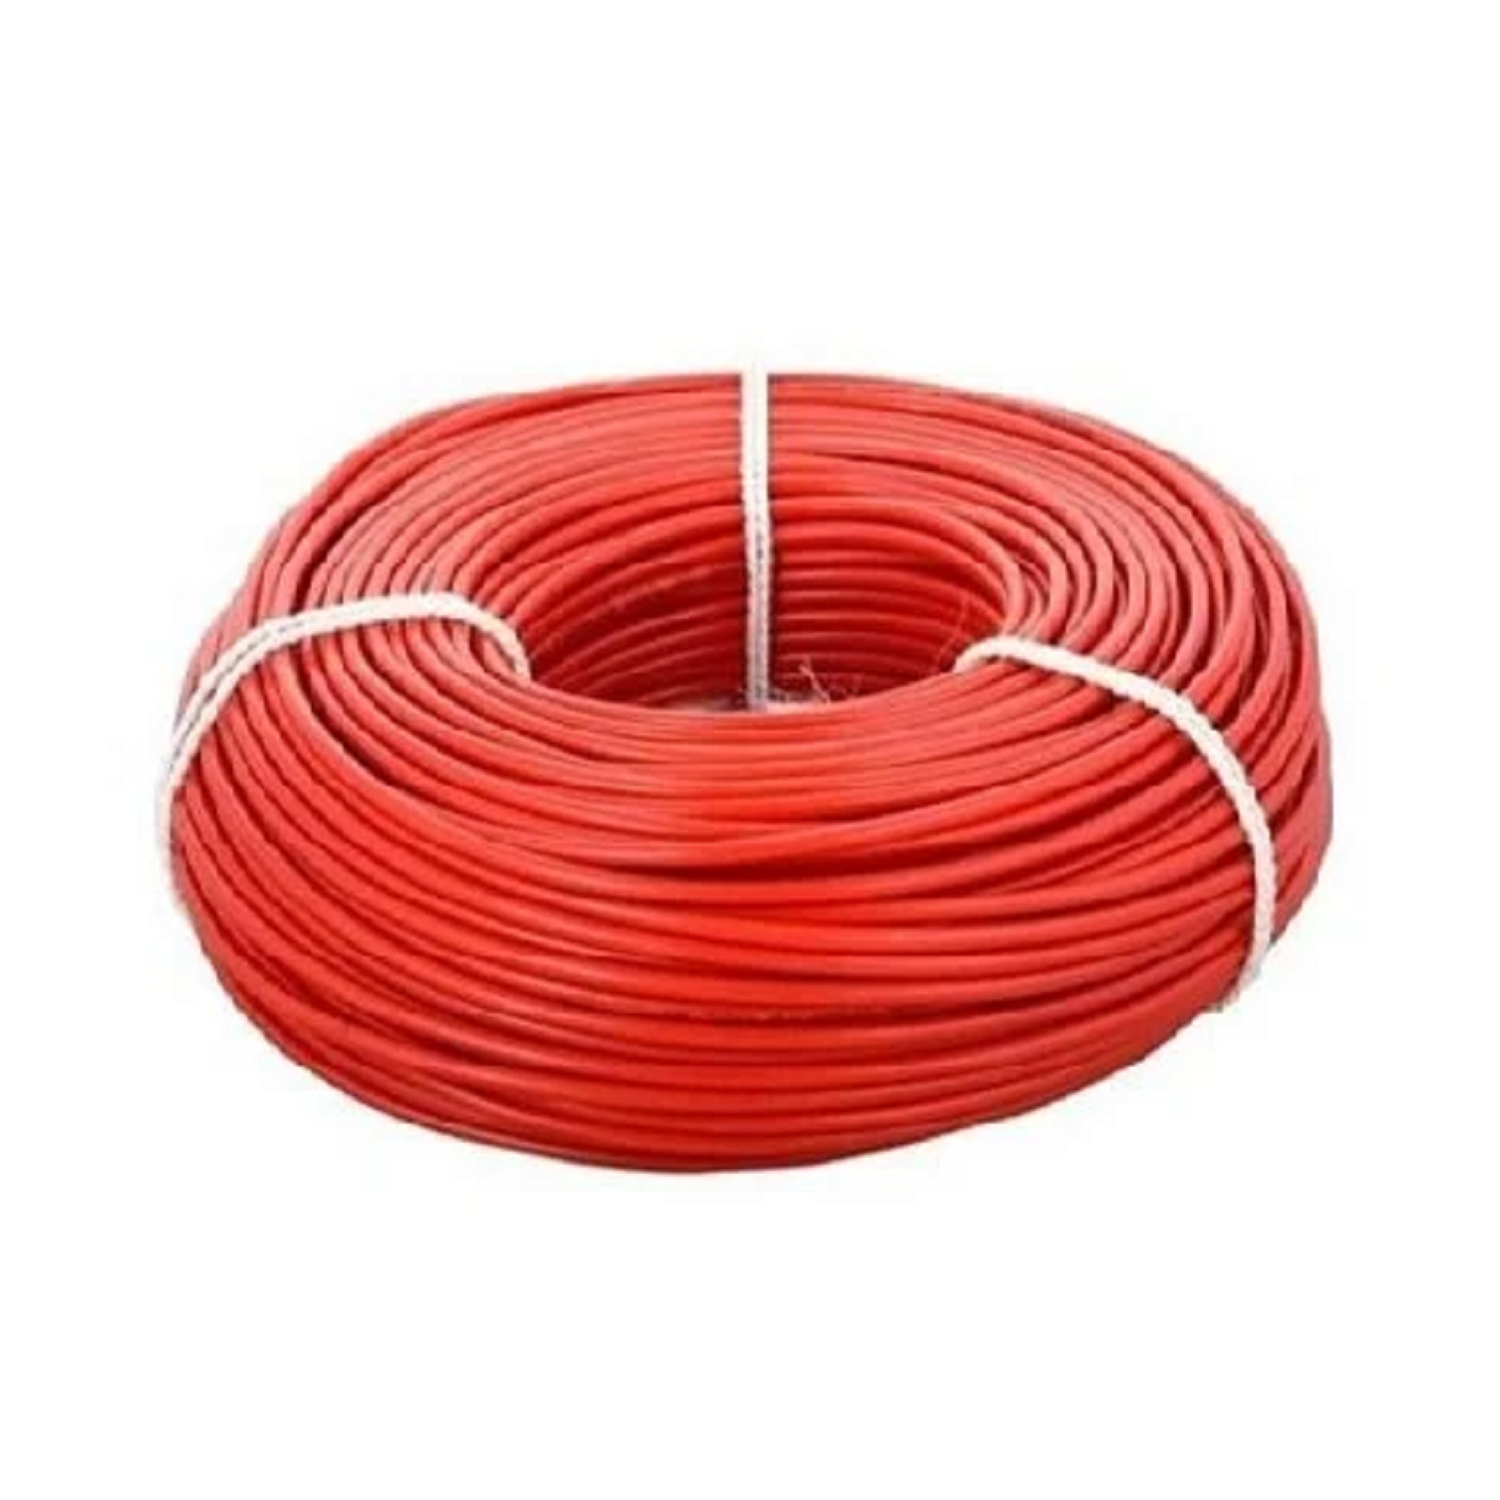 2.5 Sqmm RR FR Single Core Copper Wire (180 Mtr) With PVC Insulated for Domestic 38 Industrial Uses 